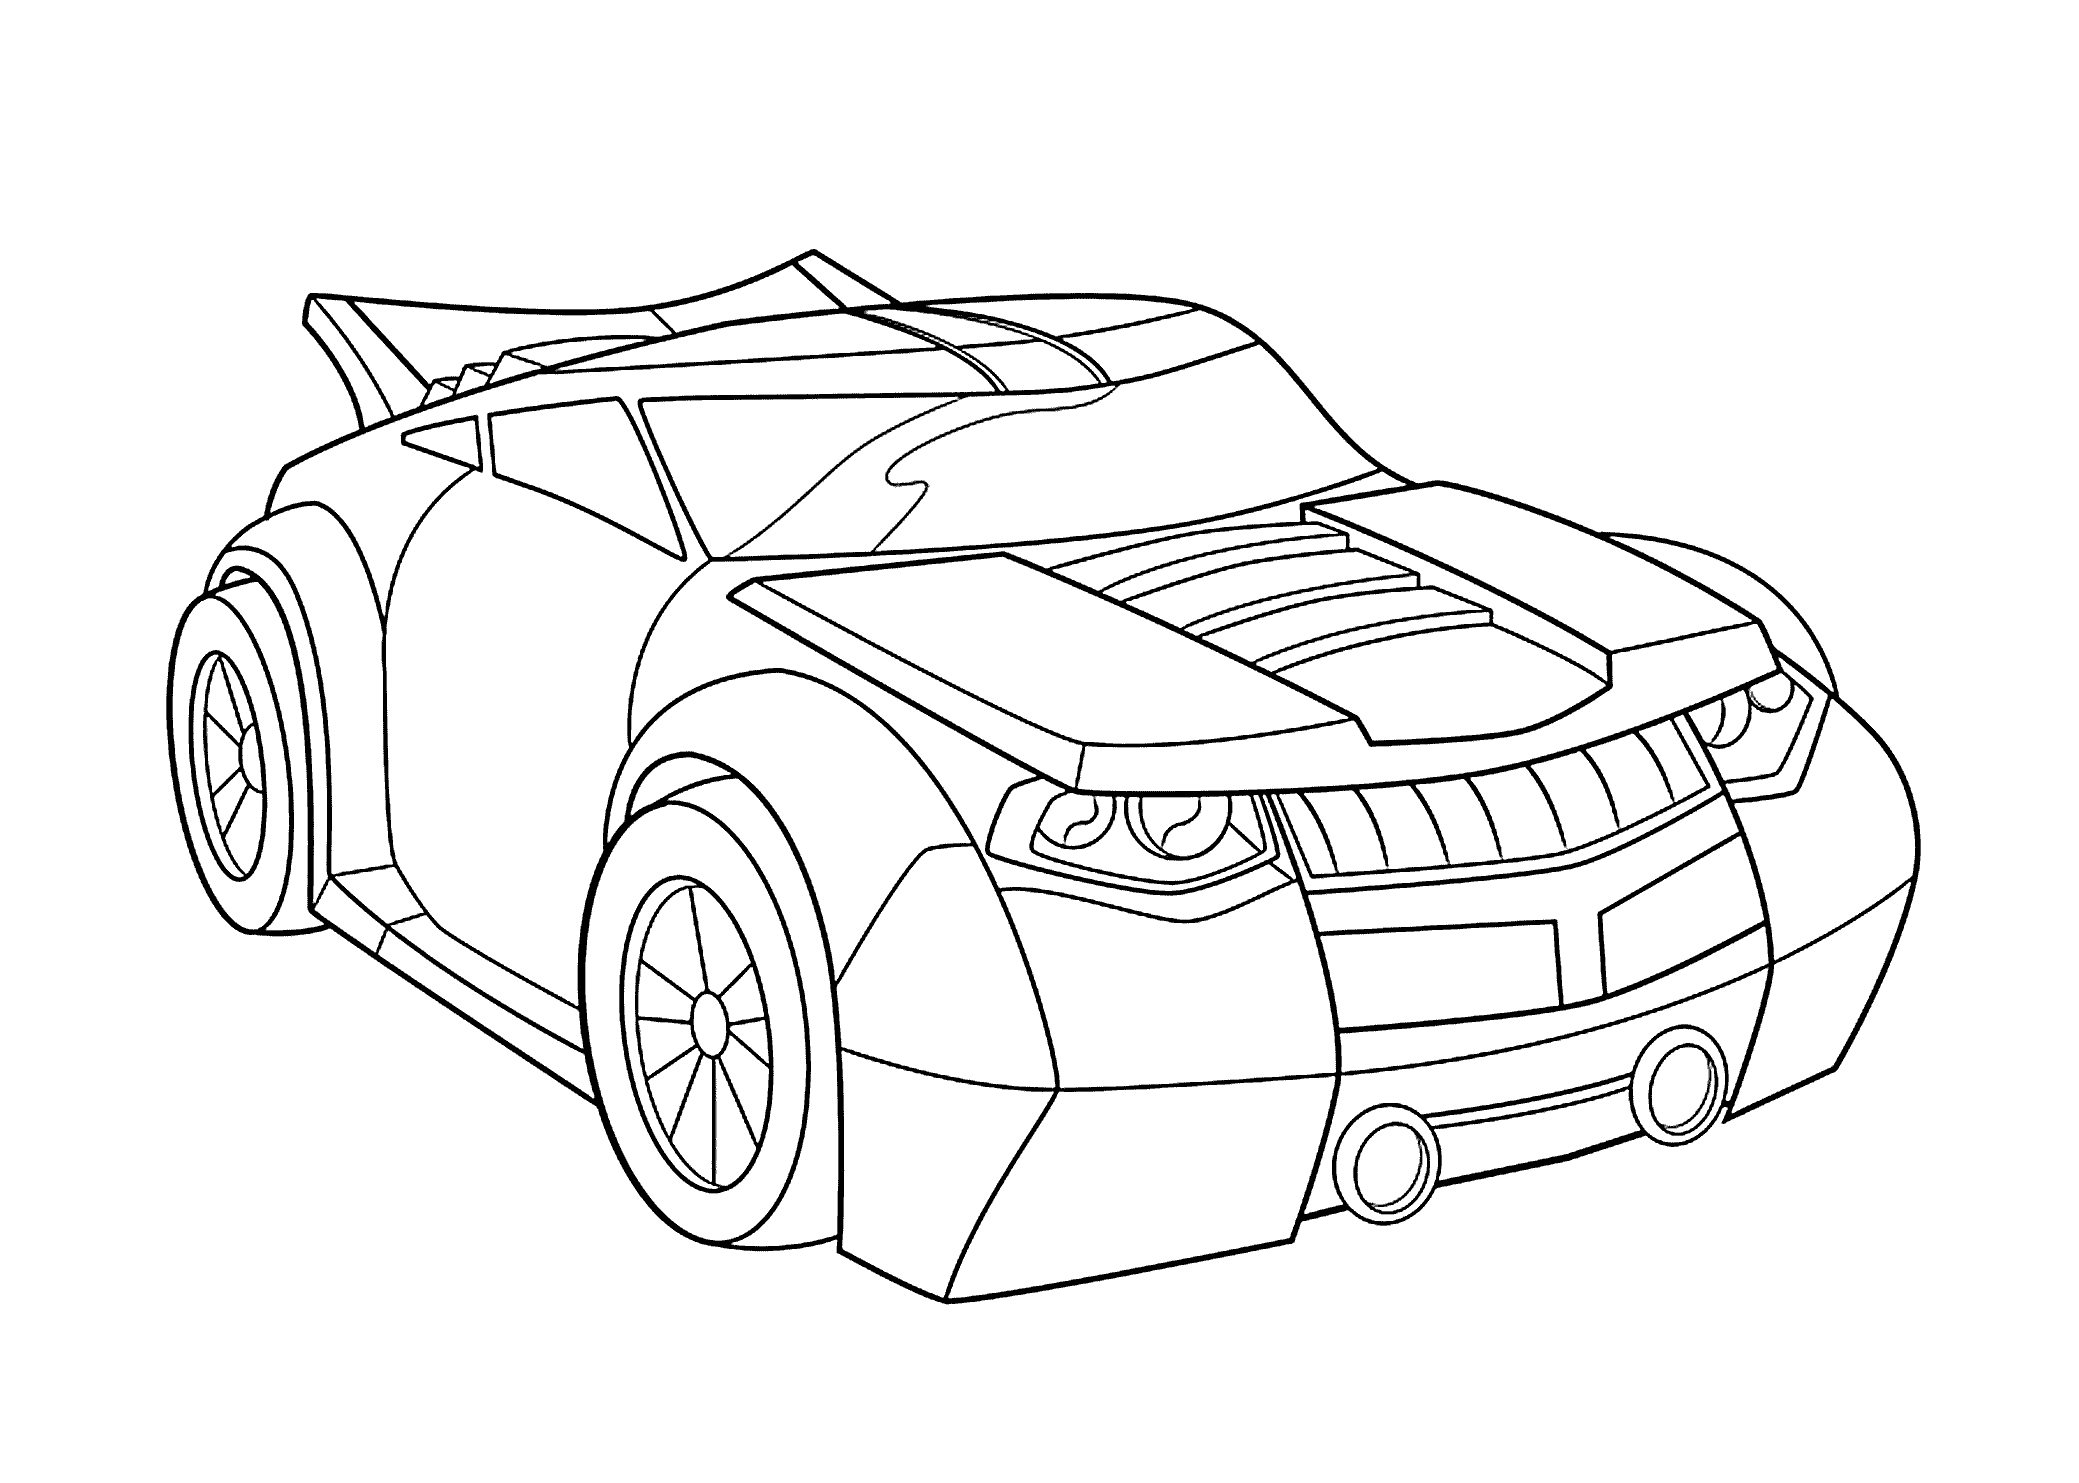 Transformers Coloring Pages TV Film Bumblebee Car Transformer Printable 2020 10559 Coloring4free